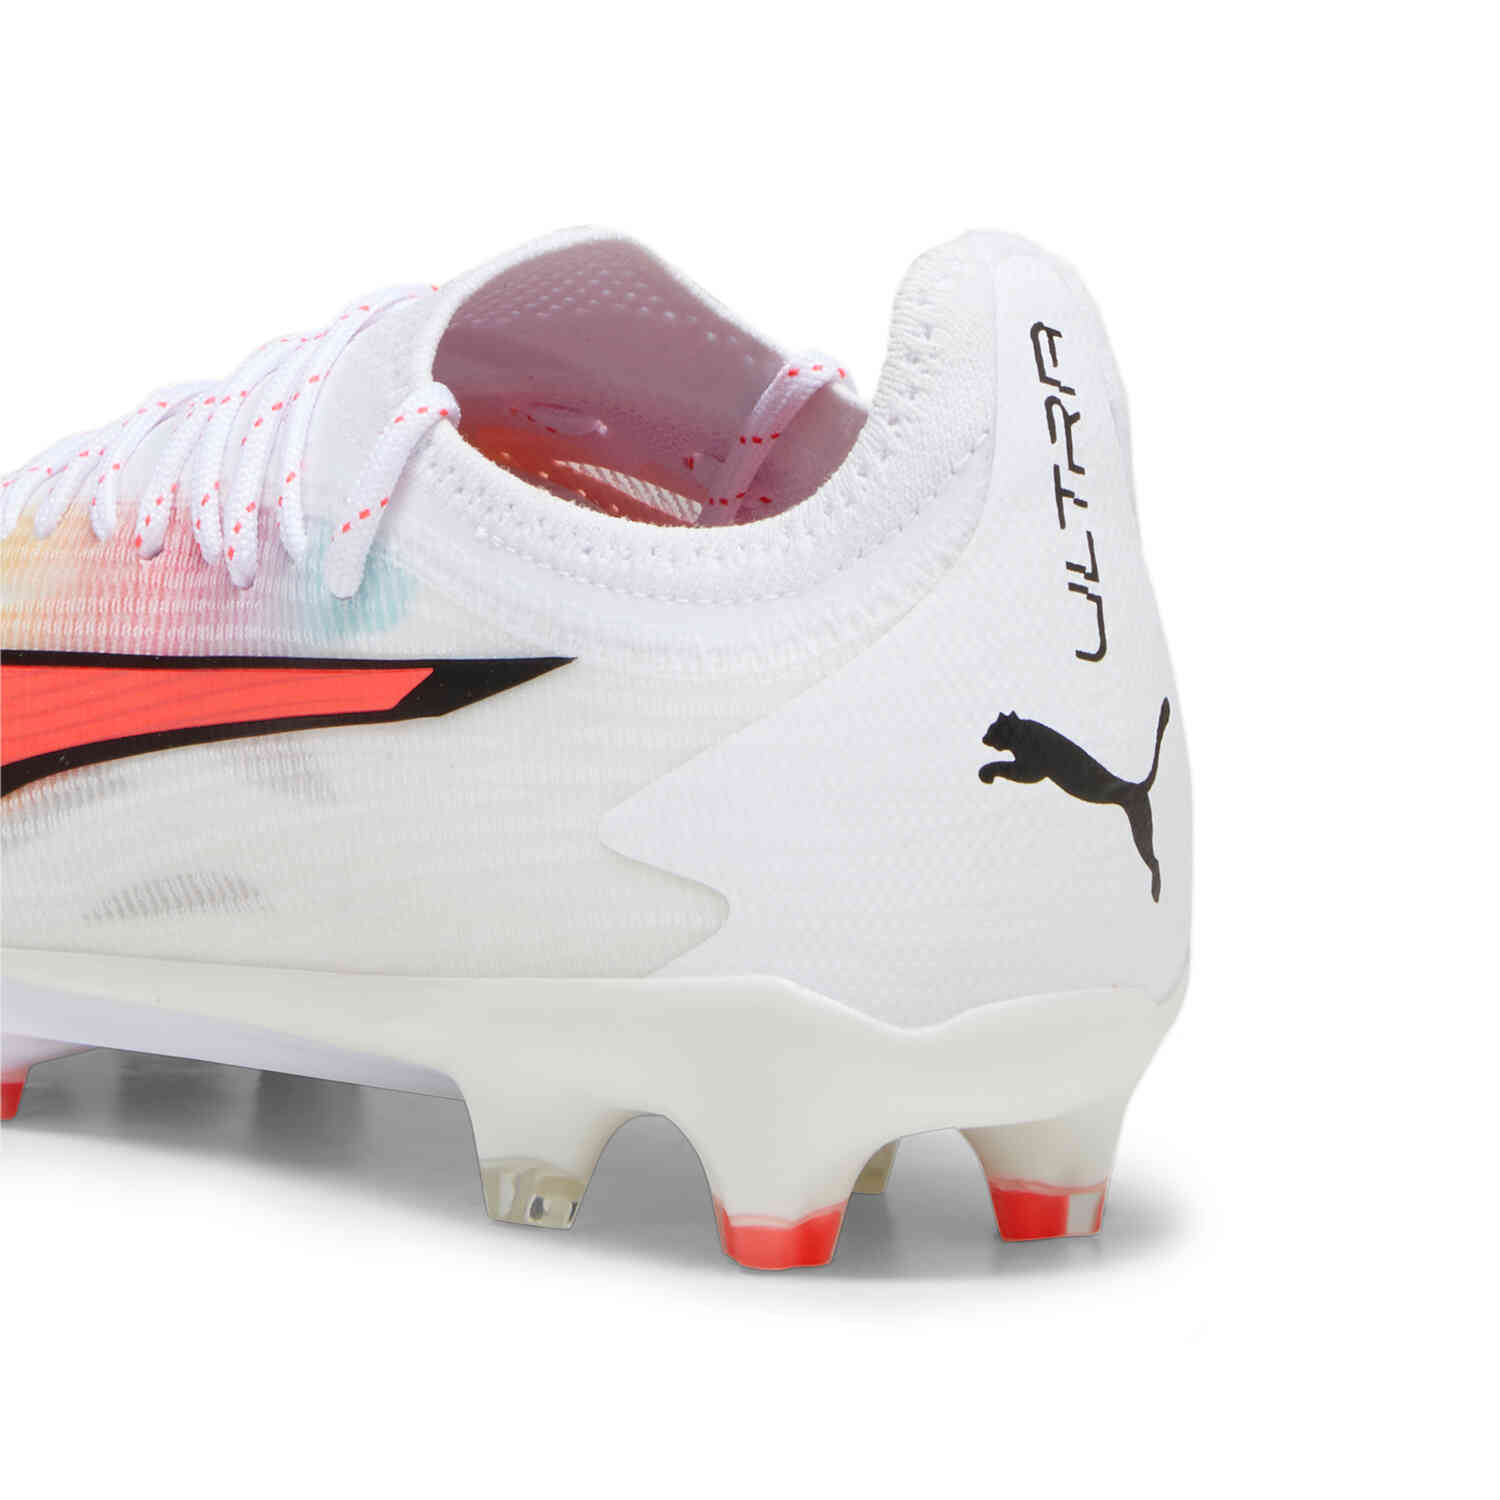 Fire - PUMA ULTIMATE ULTRA - FG/AG Soccer & Black Master Orchid White, Soccer Cleats